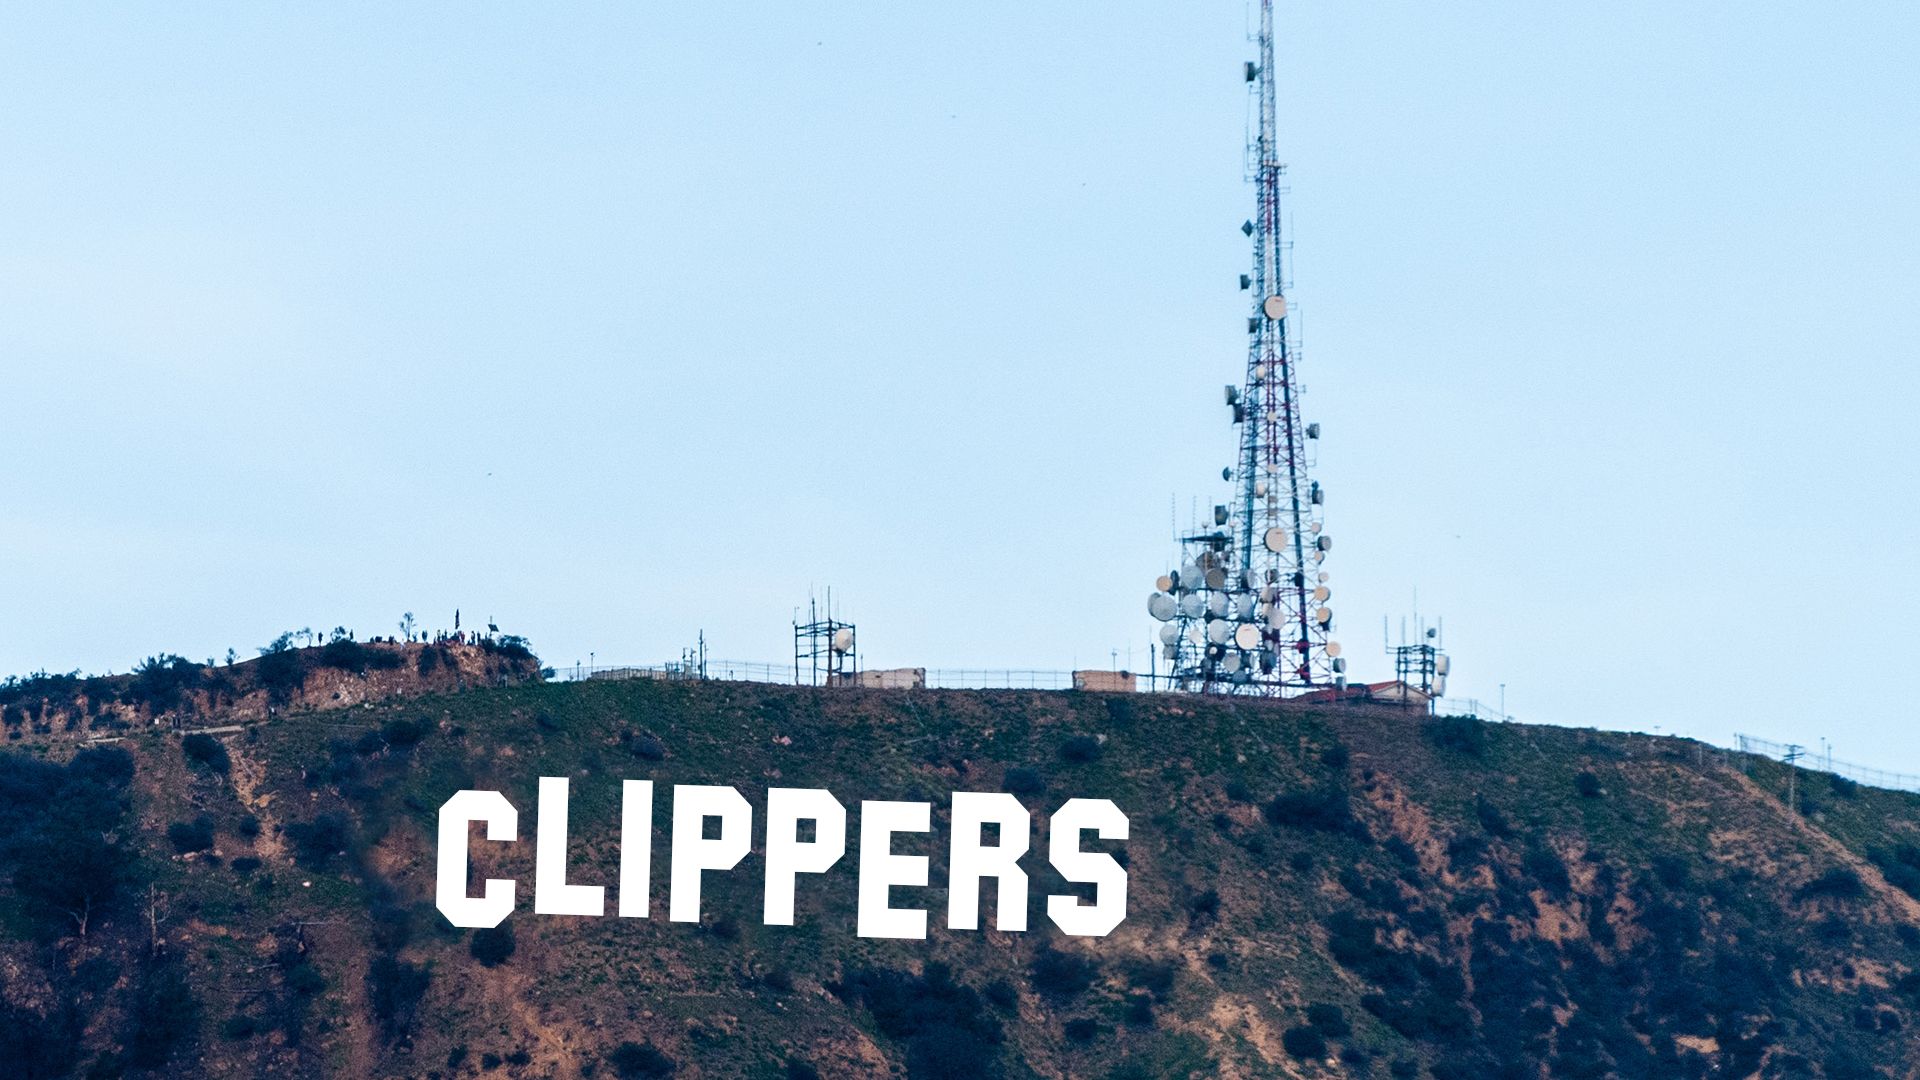 Illustration of "Clippers" replacing the Hollywood sign